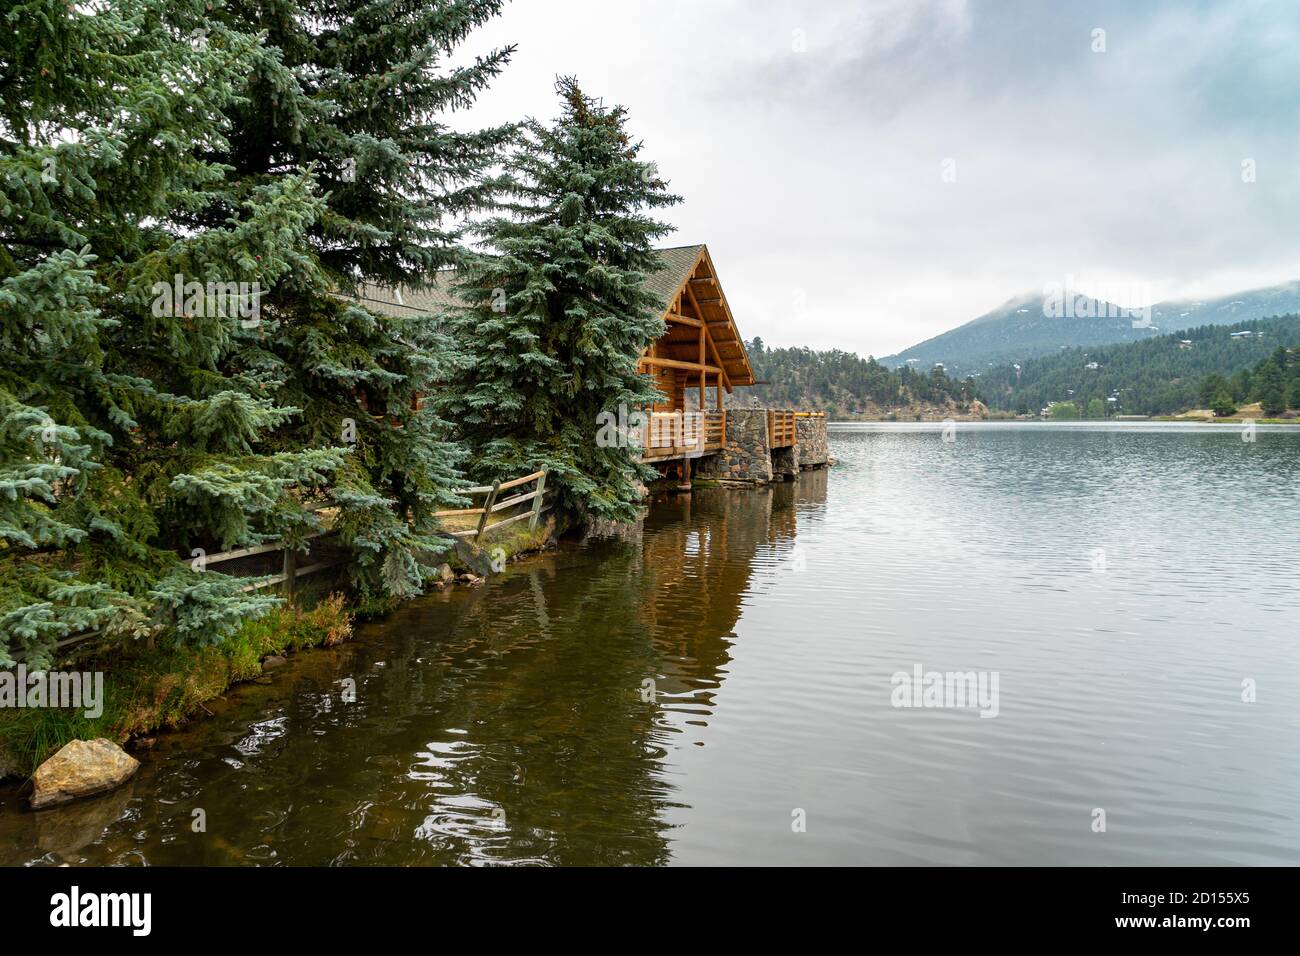 A log building and evergreen trees by Evergreen lake in Colorado. Stock Photo